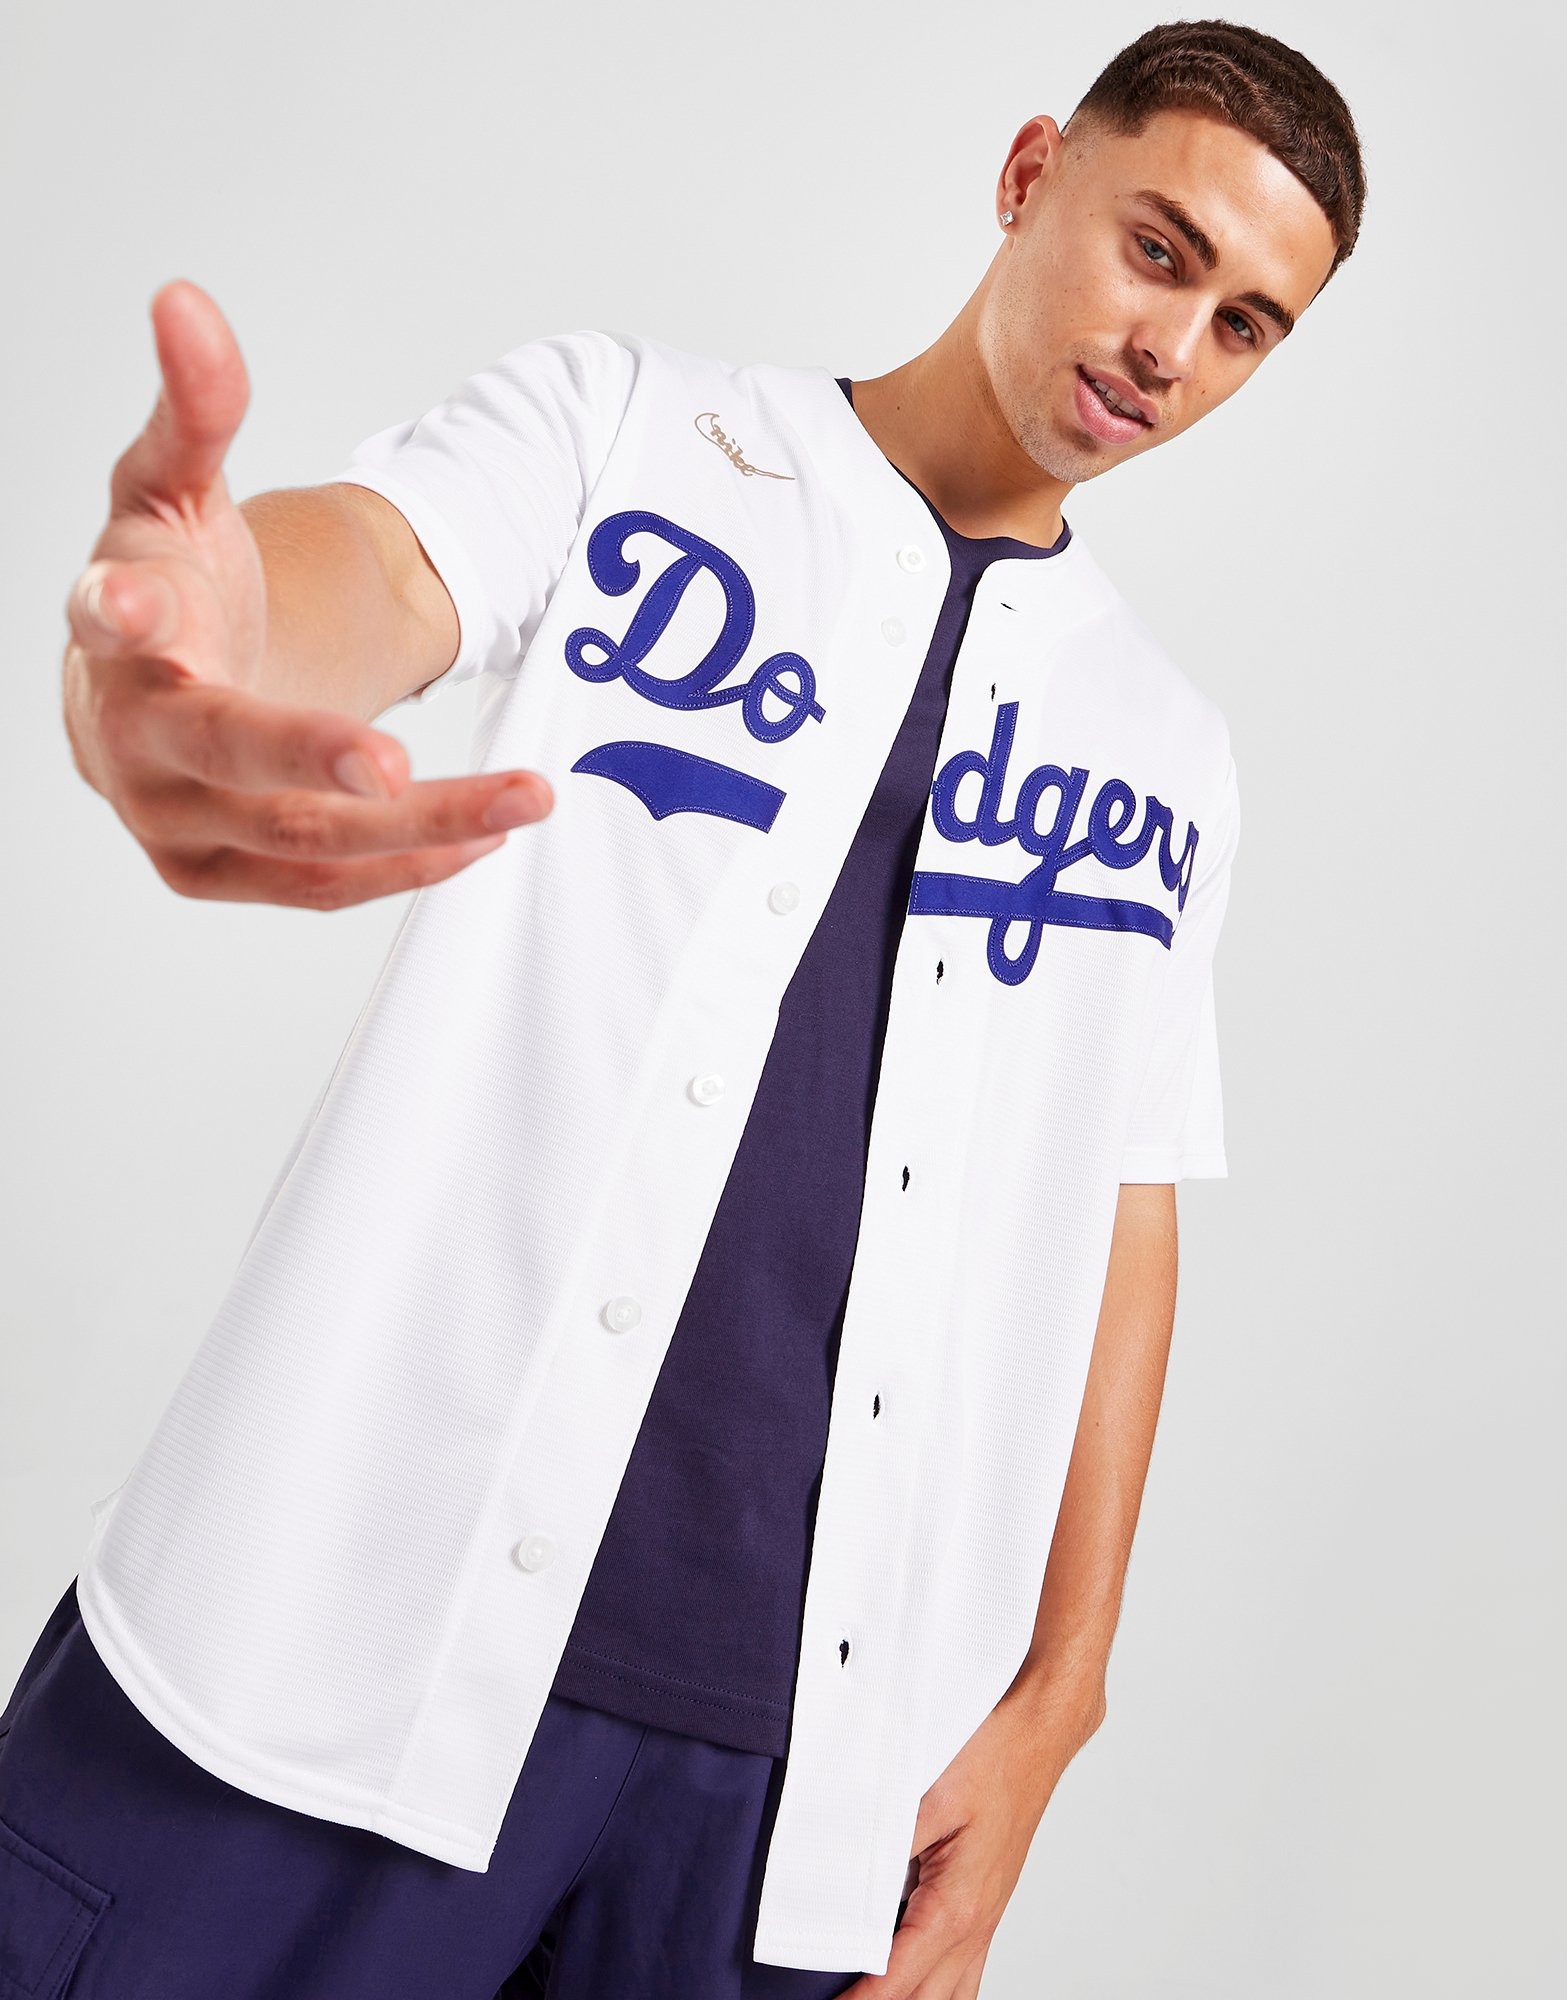 where can i buy a dodger jersey